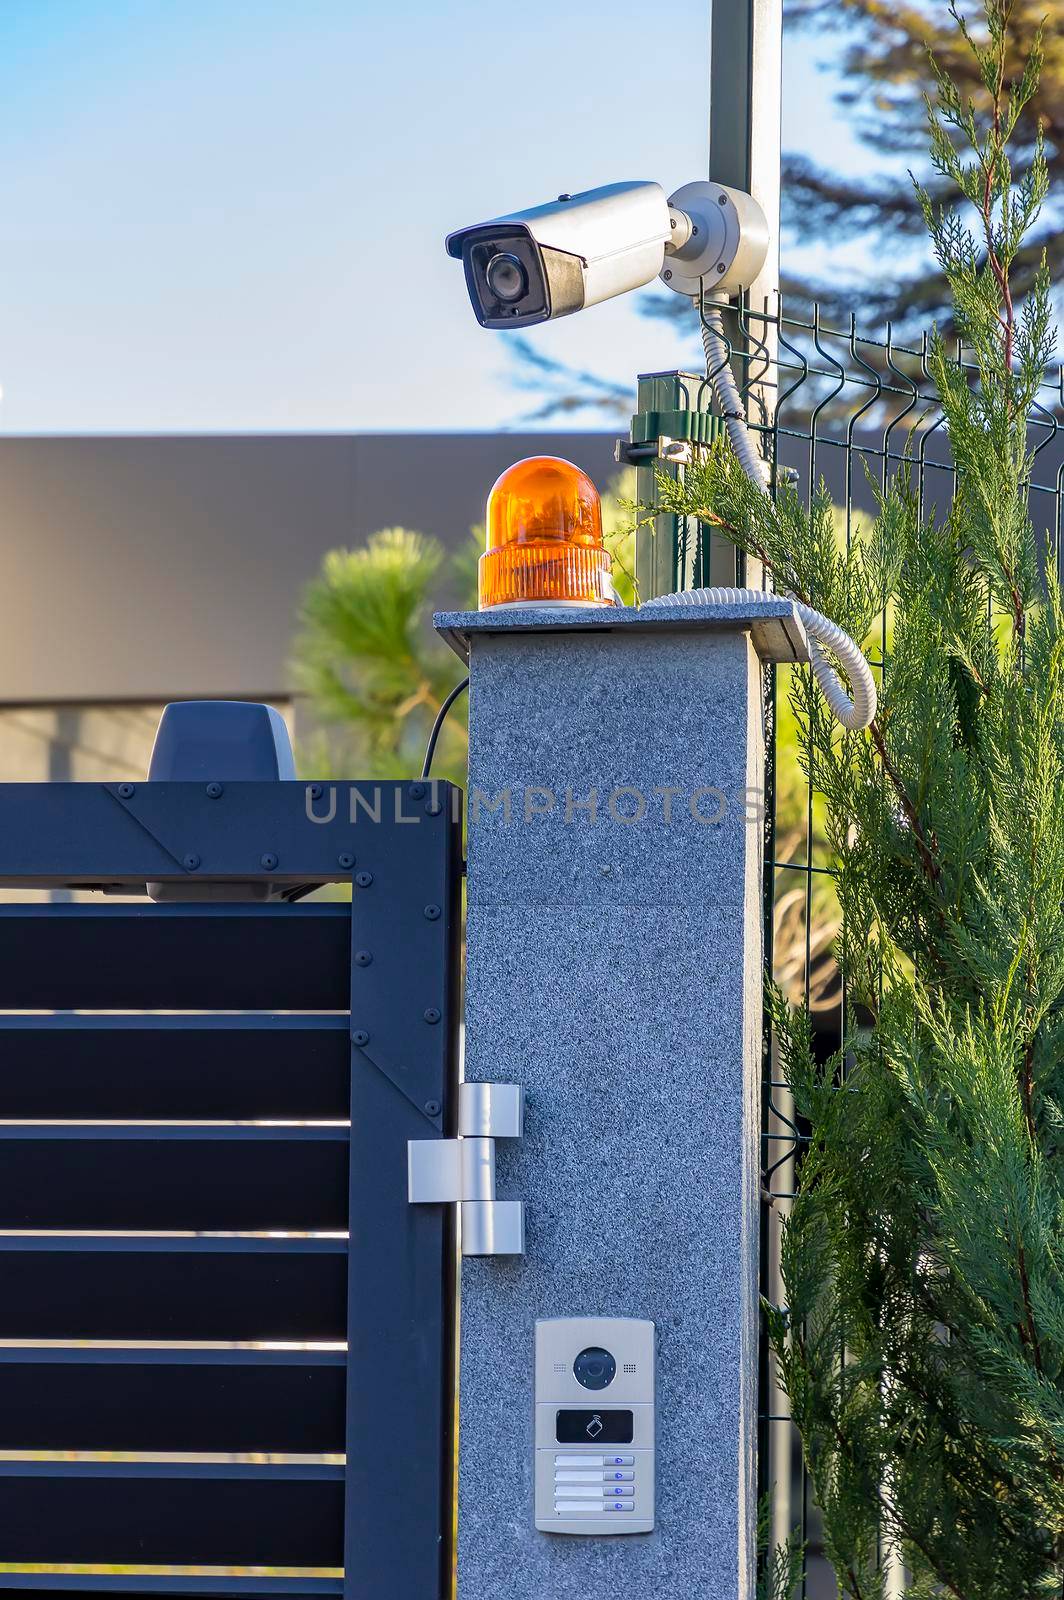 Security equipment - lamp, camera and video intercom, in the entry of a house. Technology and security 